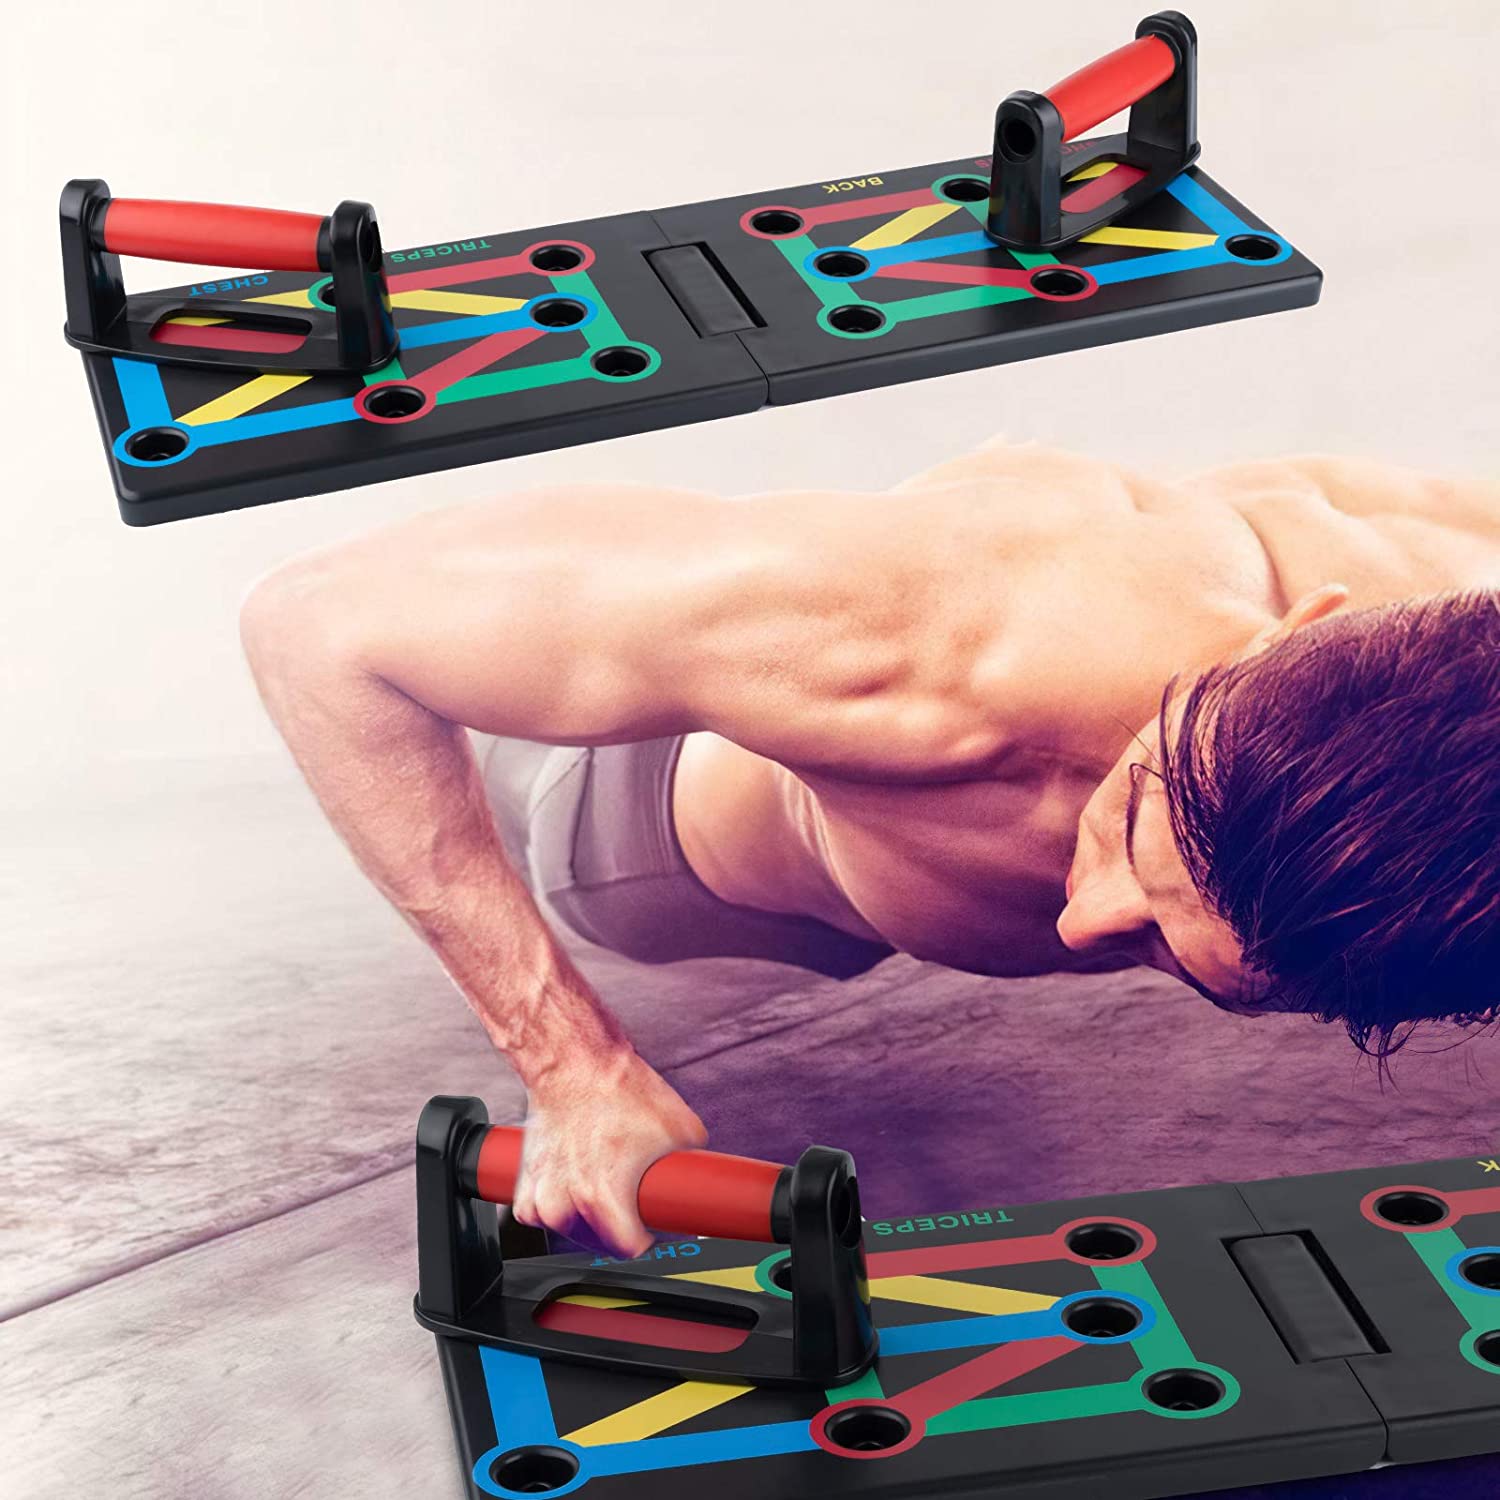 SmashPT uk : Foldable 12 In 1 Body Building Push Up Rack Board, Board can also stand folded, Colour-coded Power-press & Multi-function Push-up.